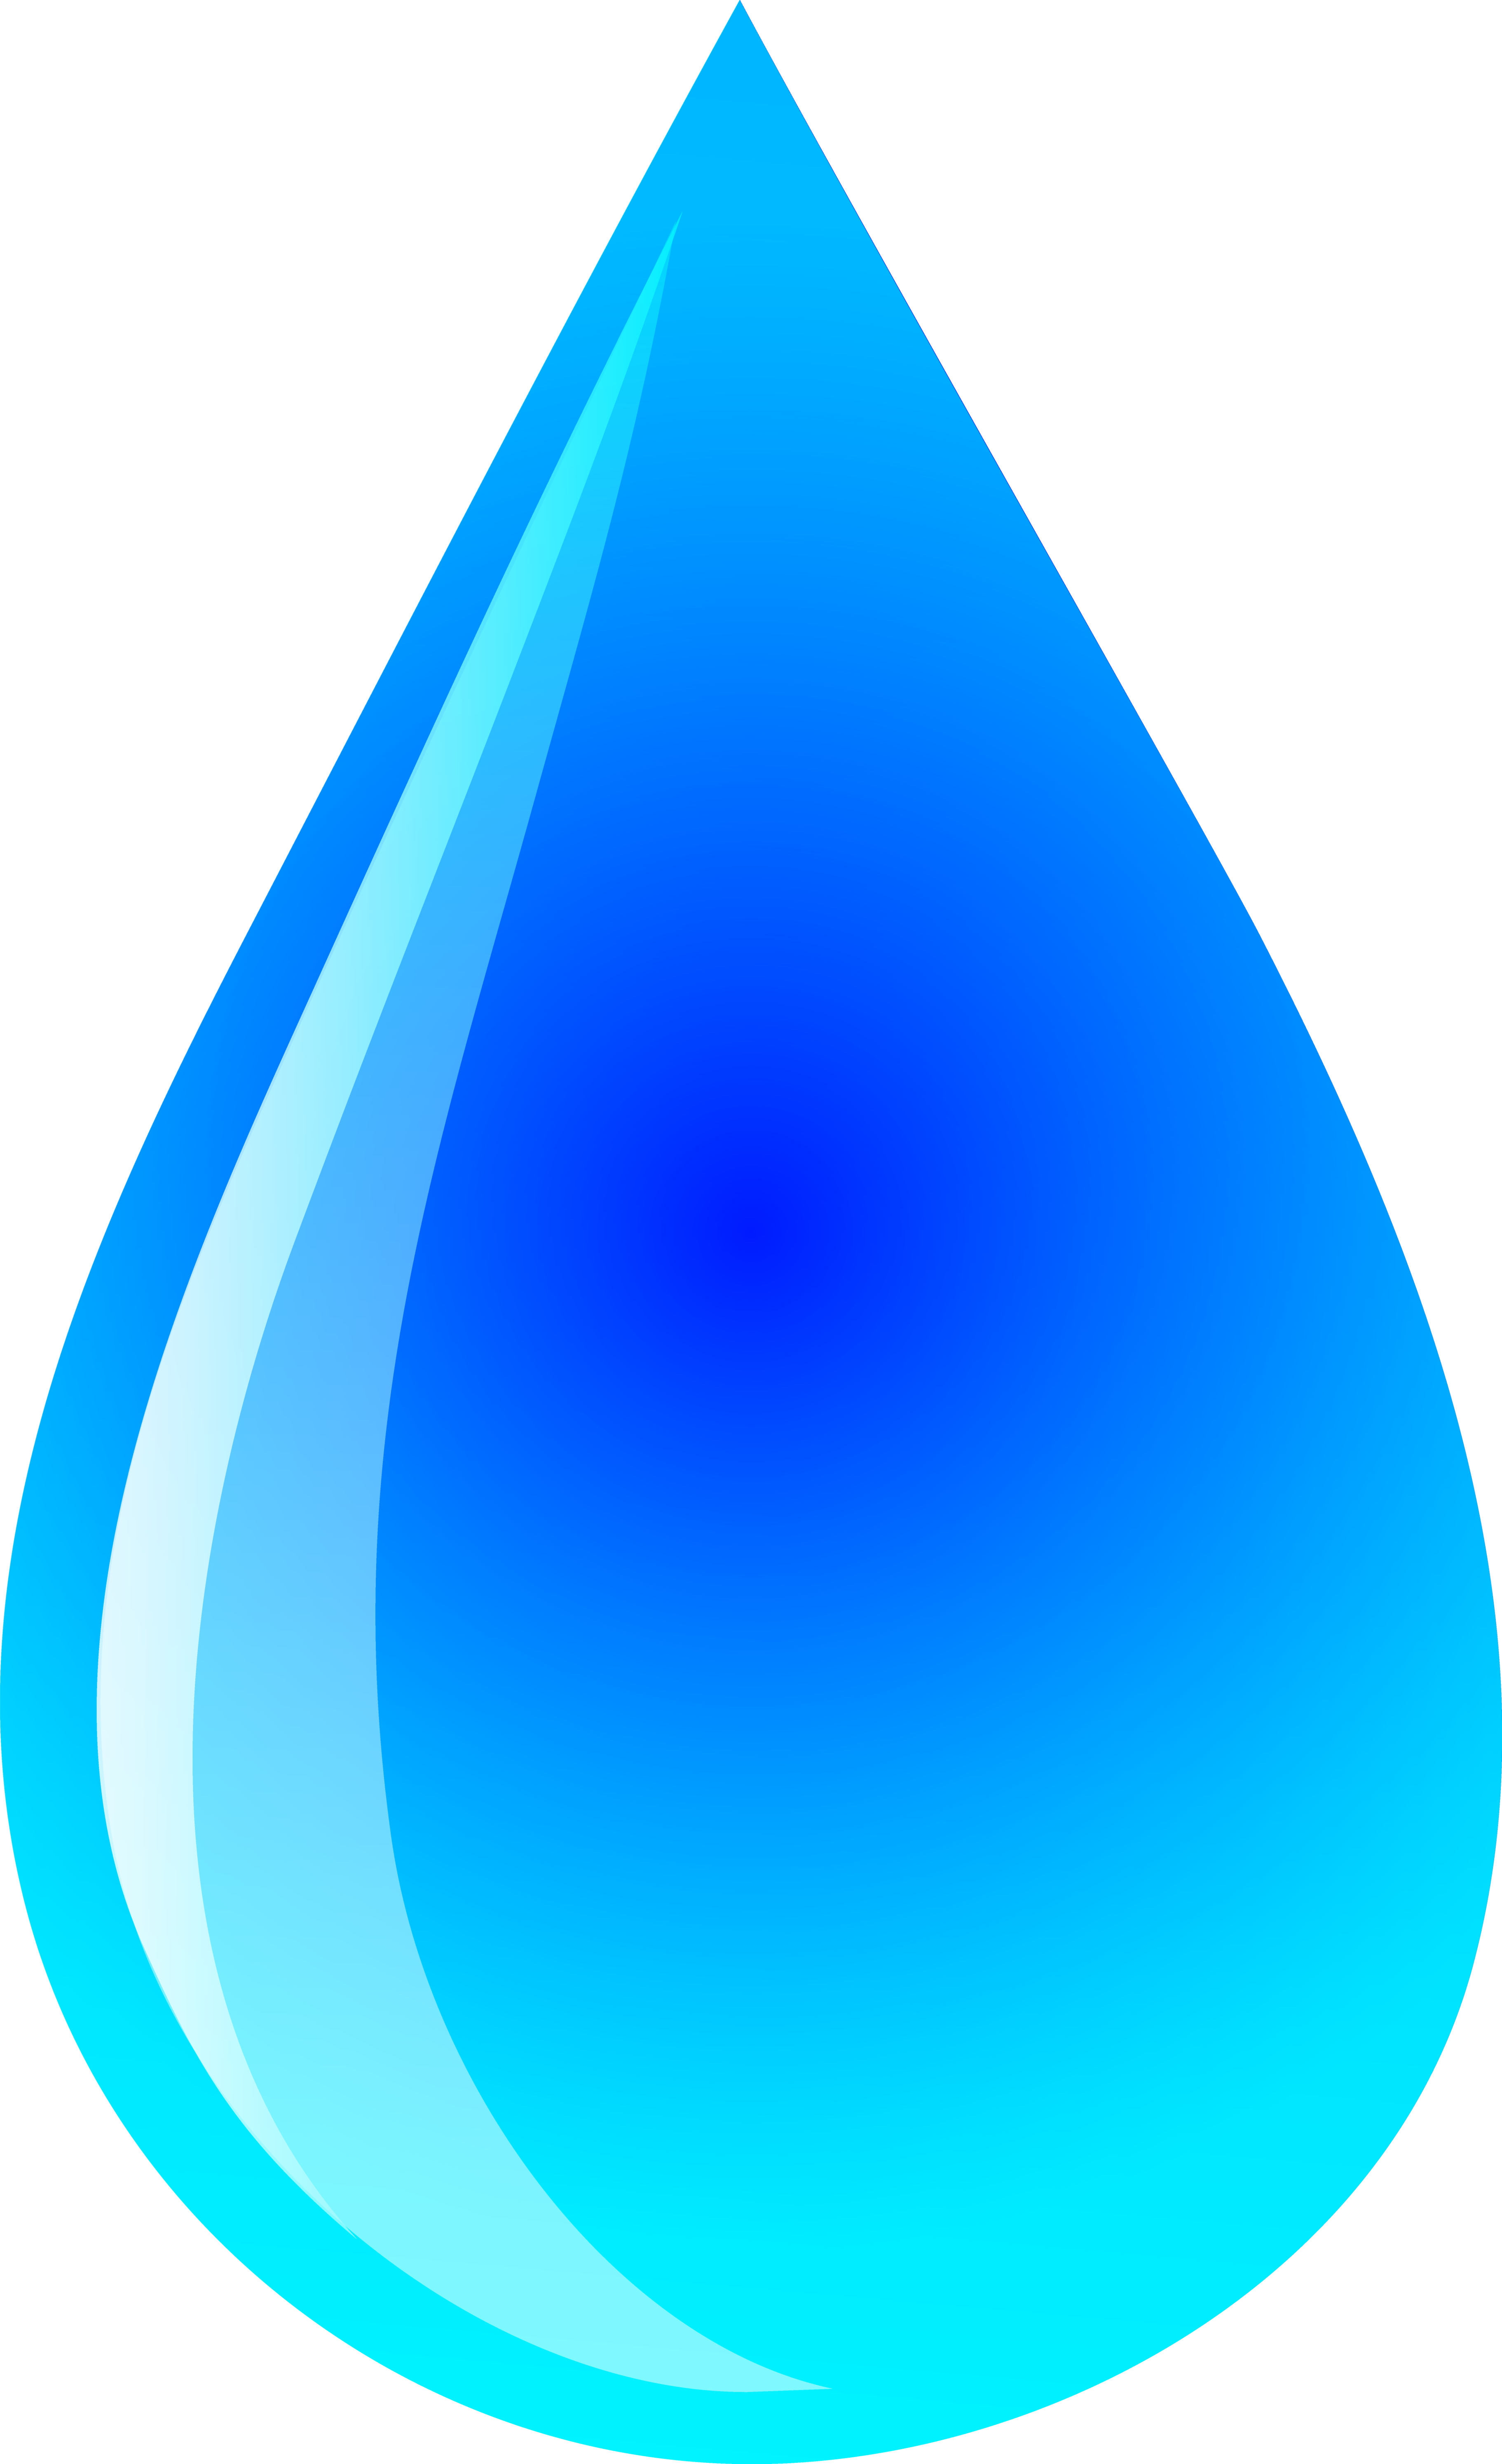 Drops of water clipart.